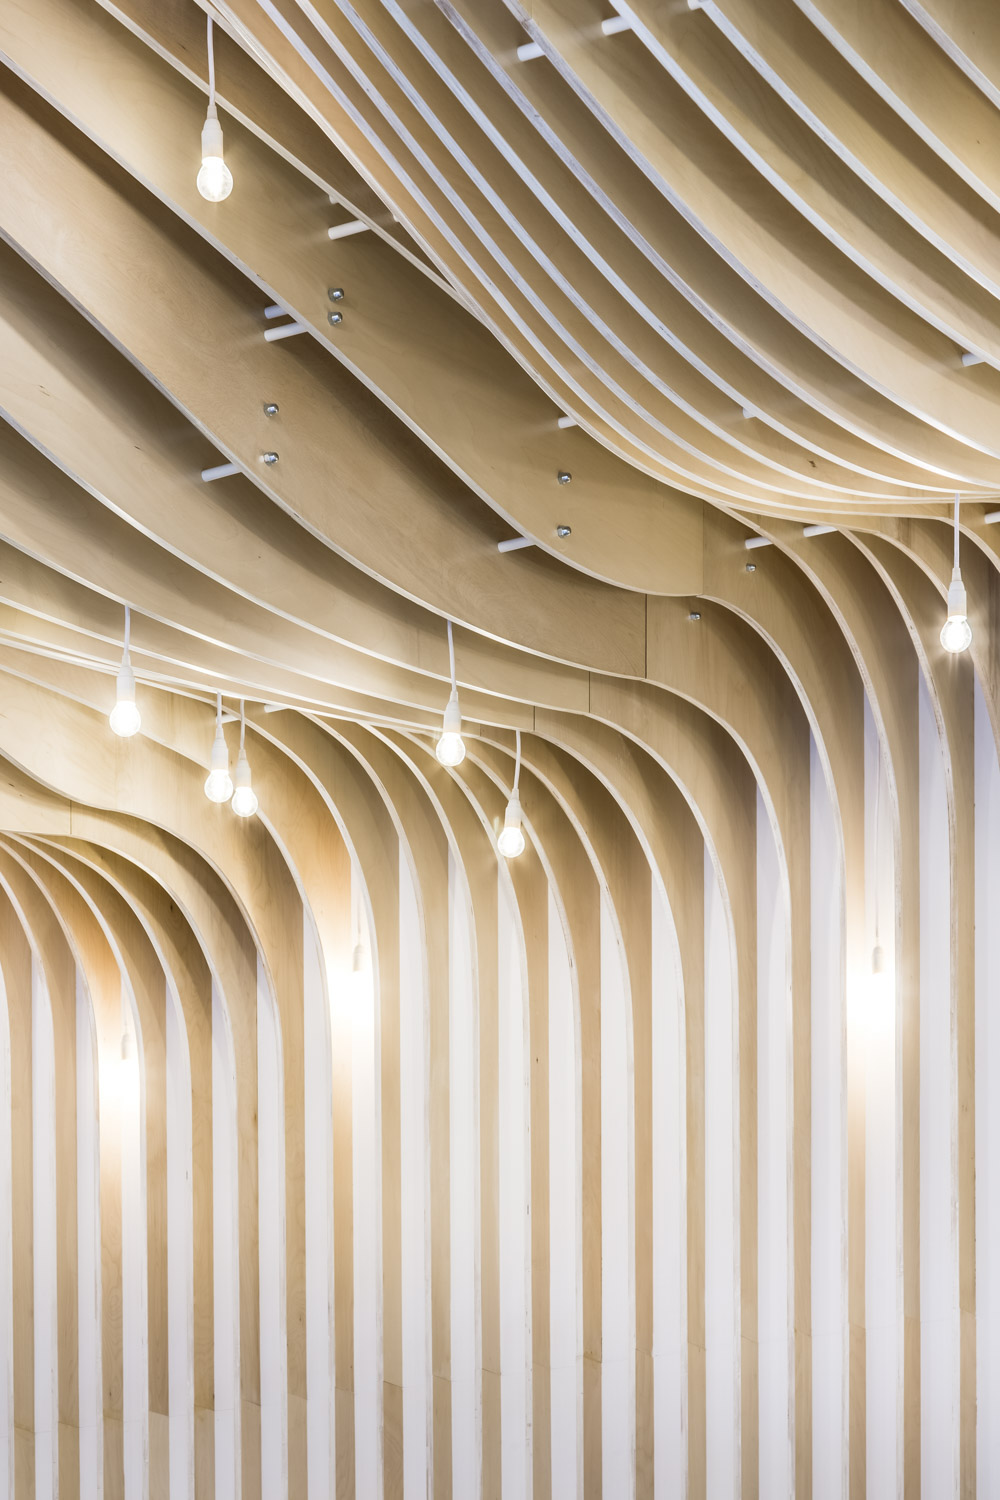 Roof flowing elegantly into the wall at 41 Eastcheap Street office, designed by Ben Adams Architects, London, UK.